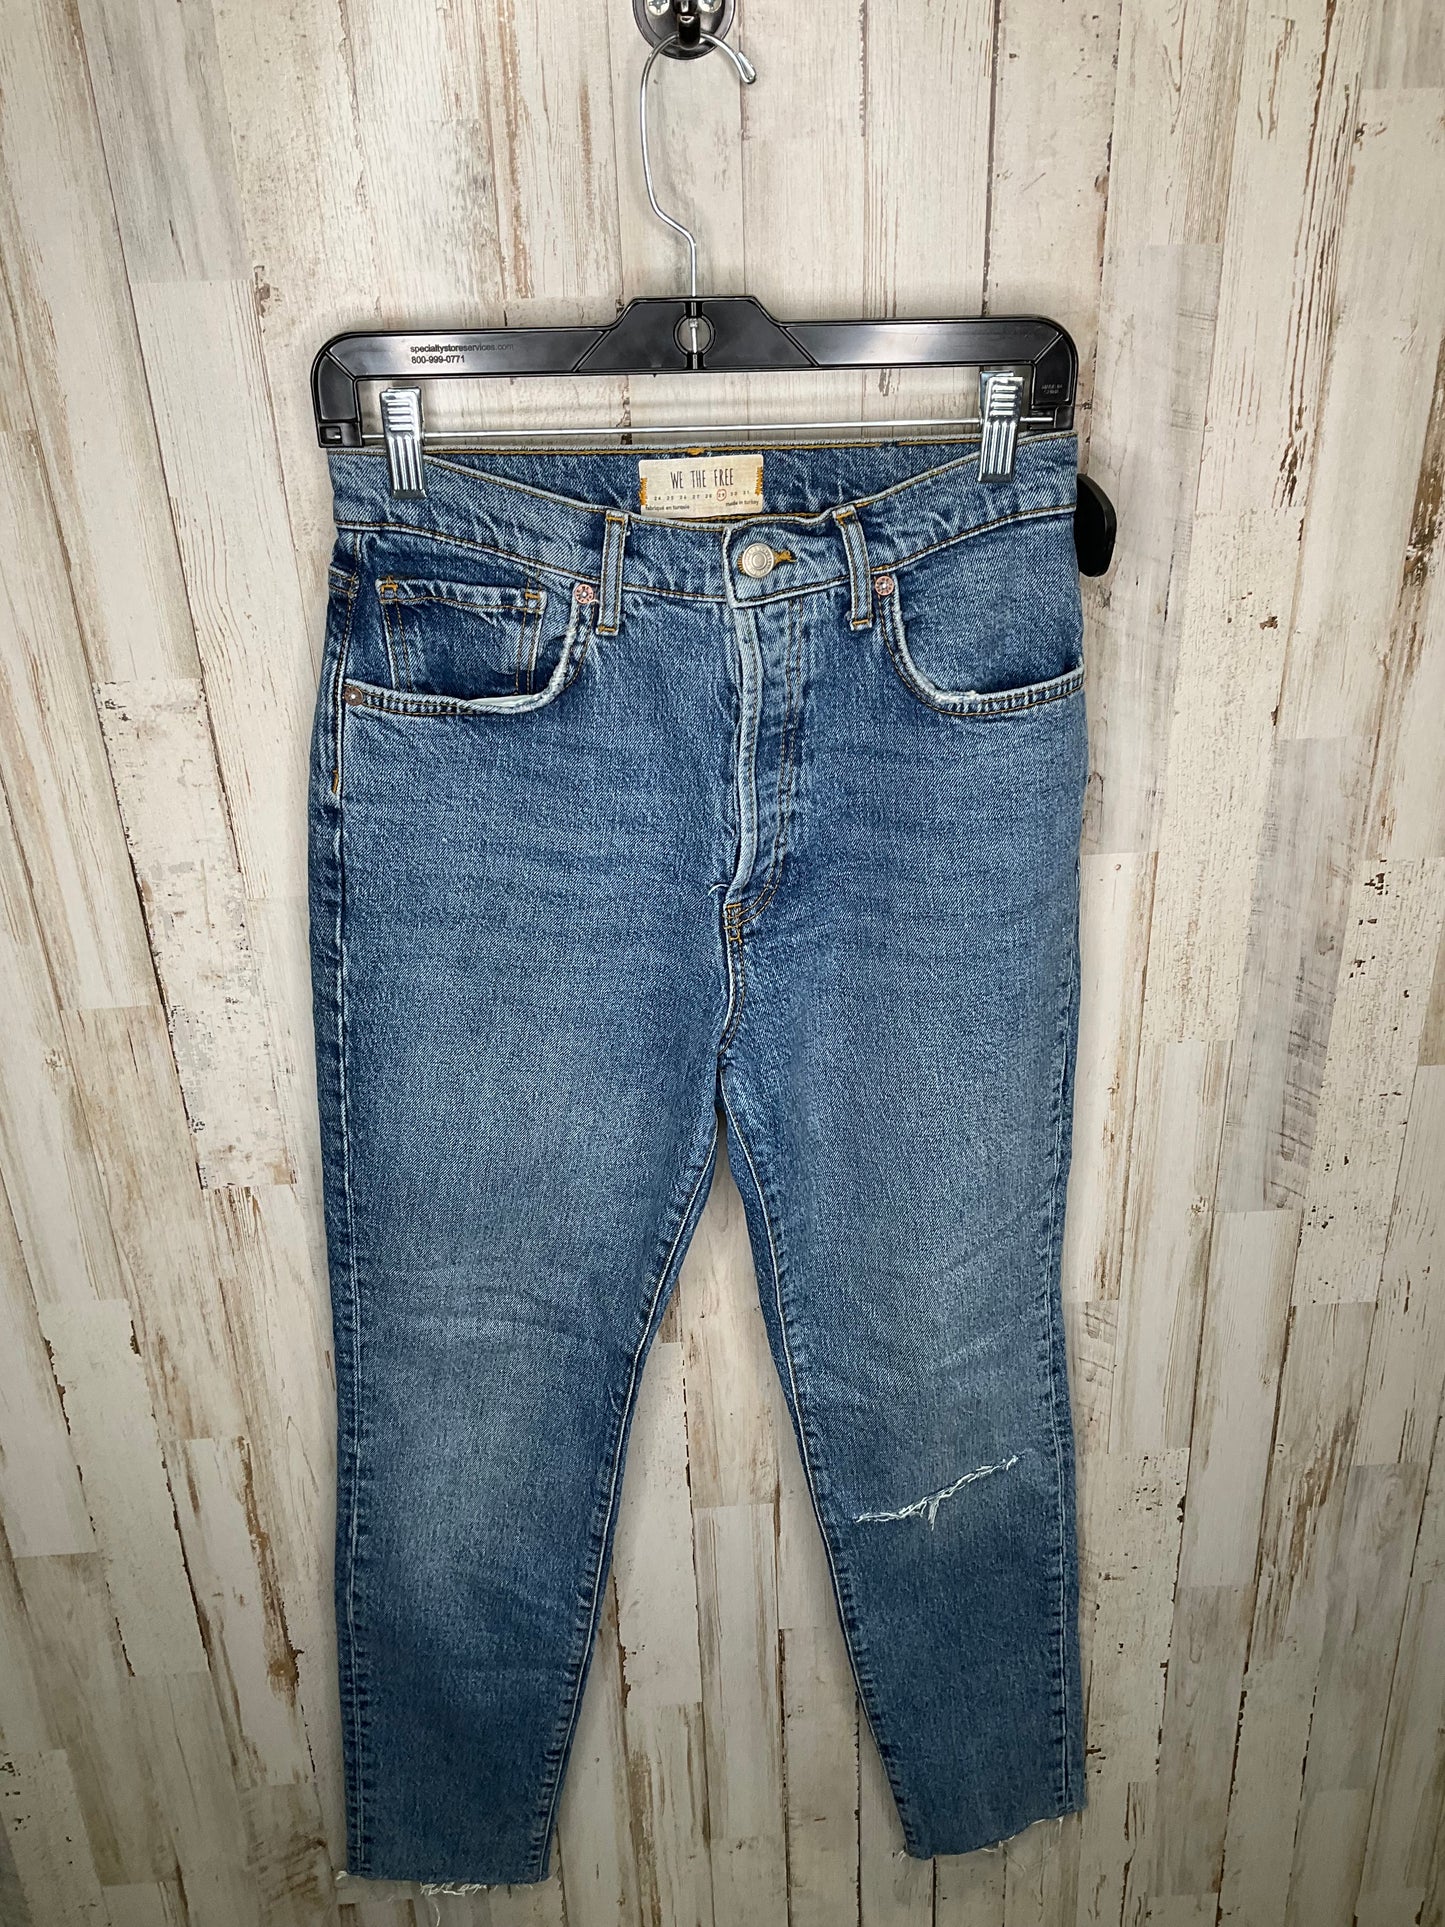 Blue Denim Jeans Boot Cut We The Free, Size 8